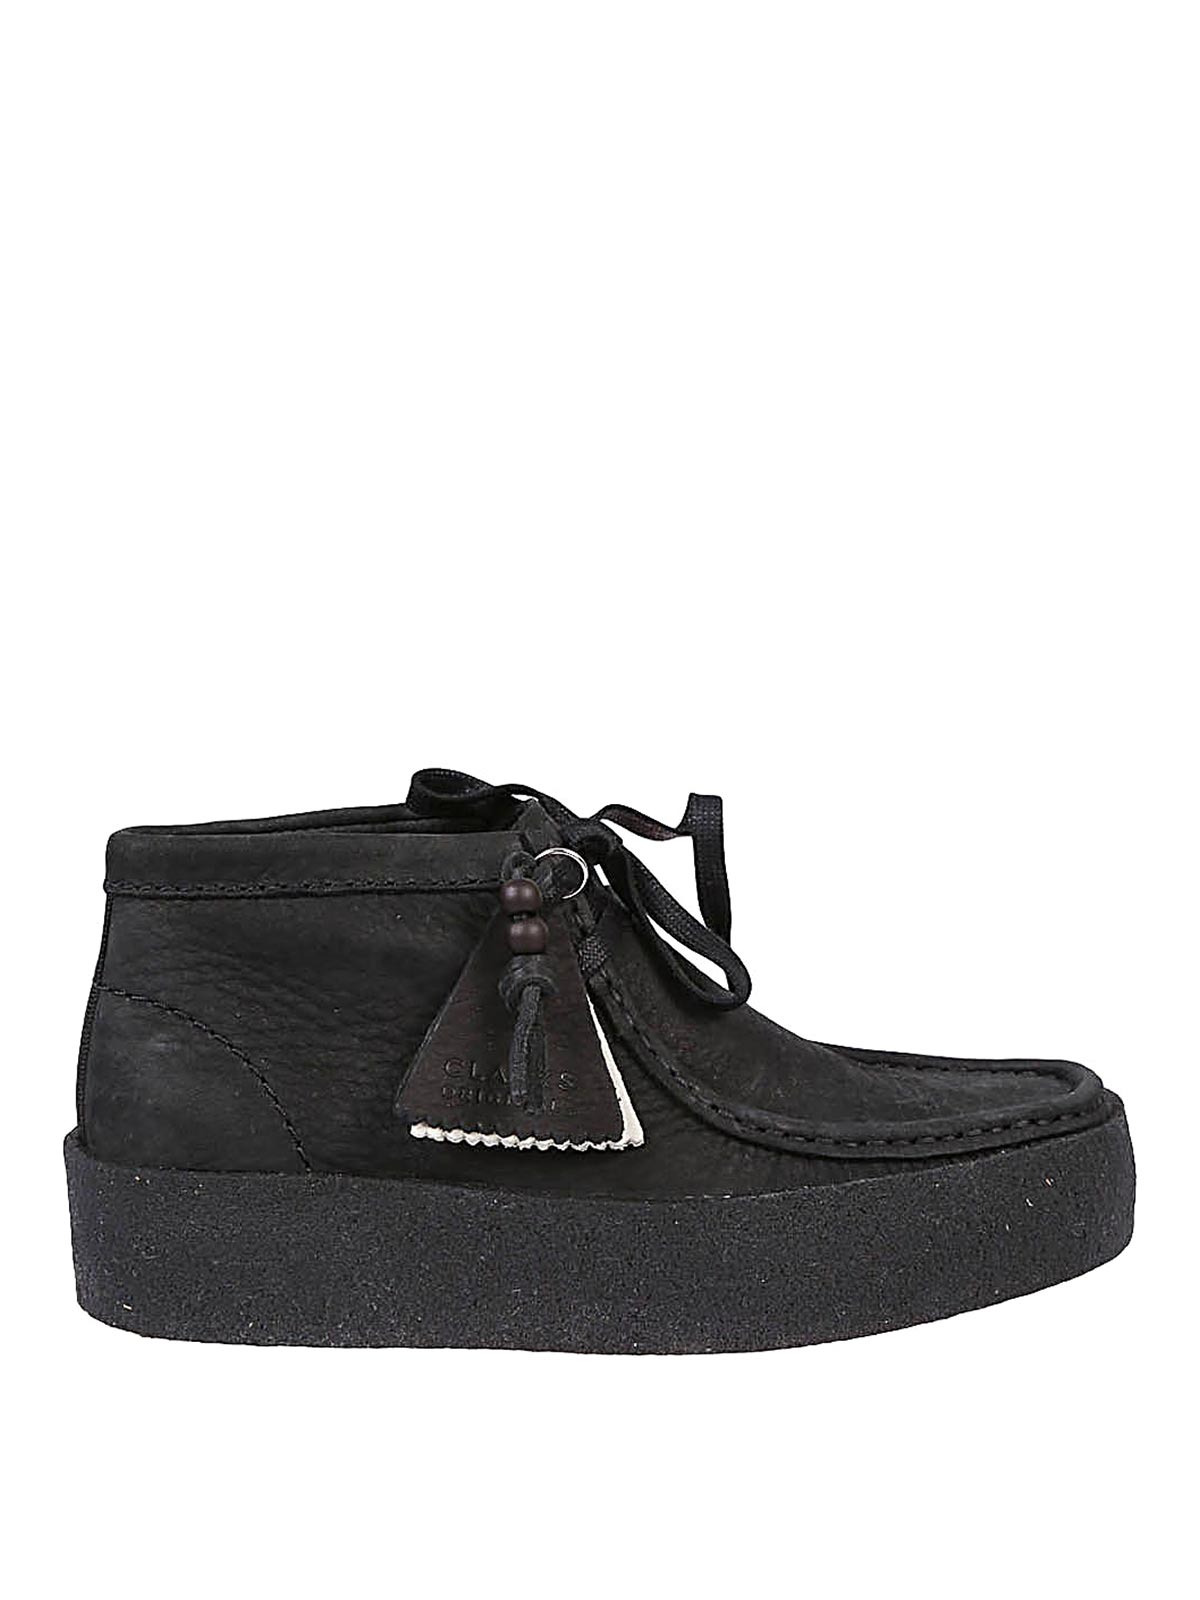 Shop Clarks Wallabee Cup Bt Leather Shoes In Black